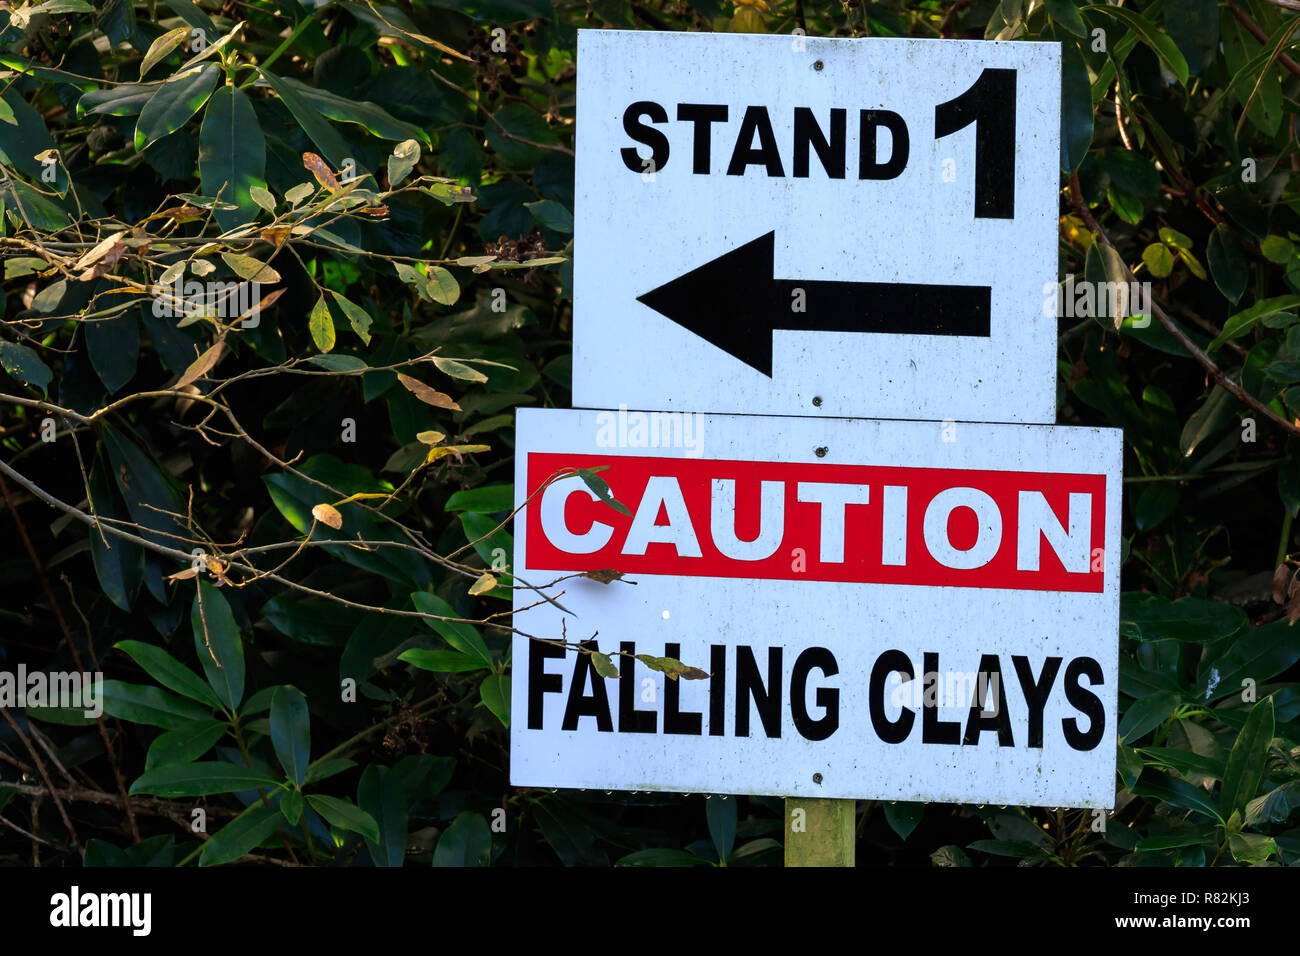 Caution falling clays sign at a shooting grounds Stock Photo